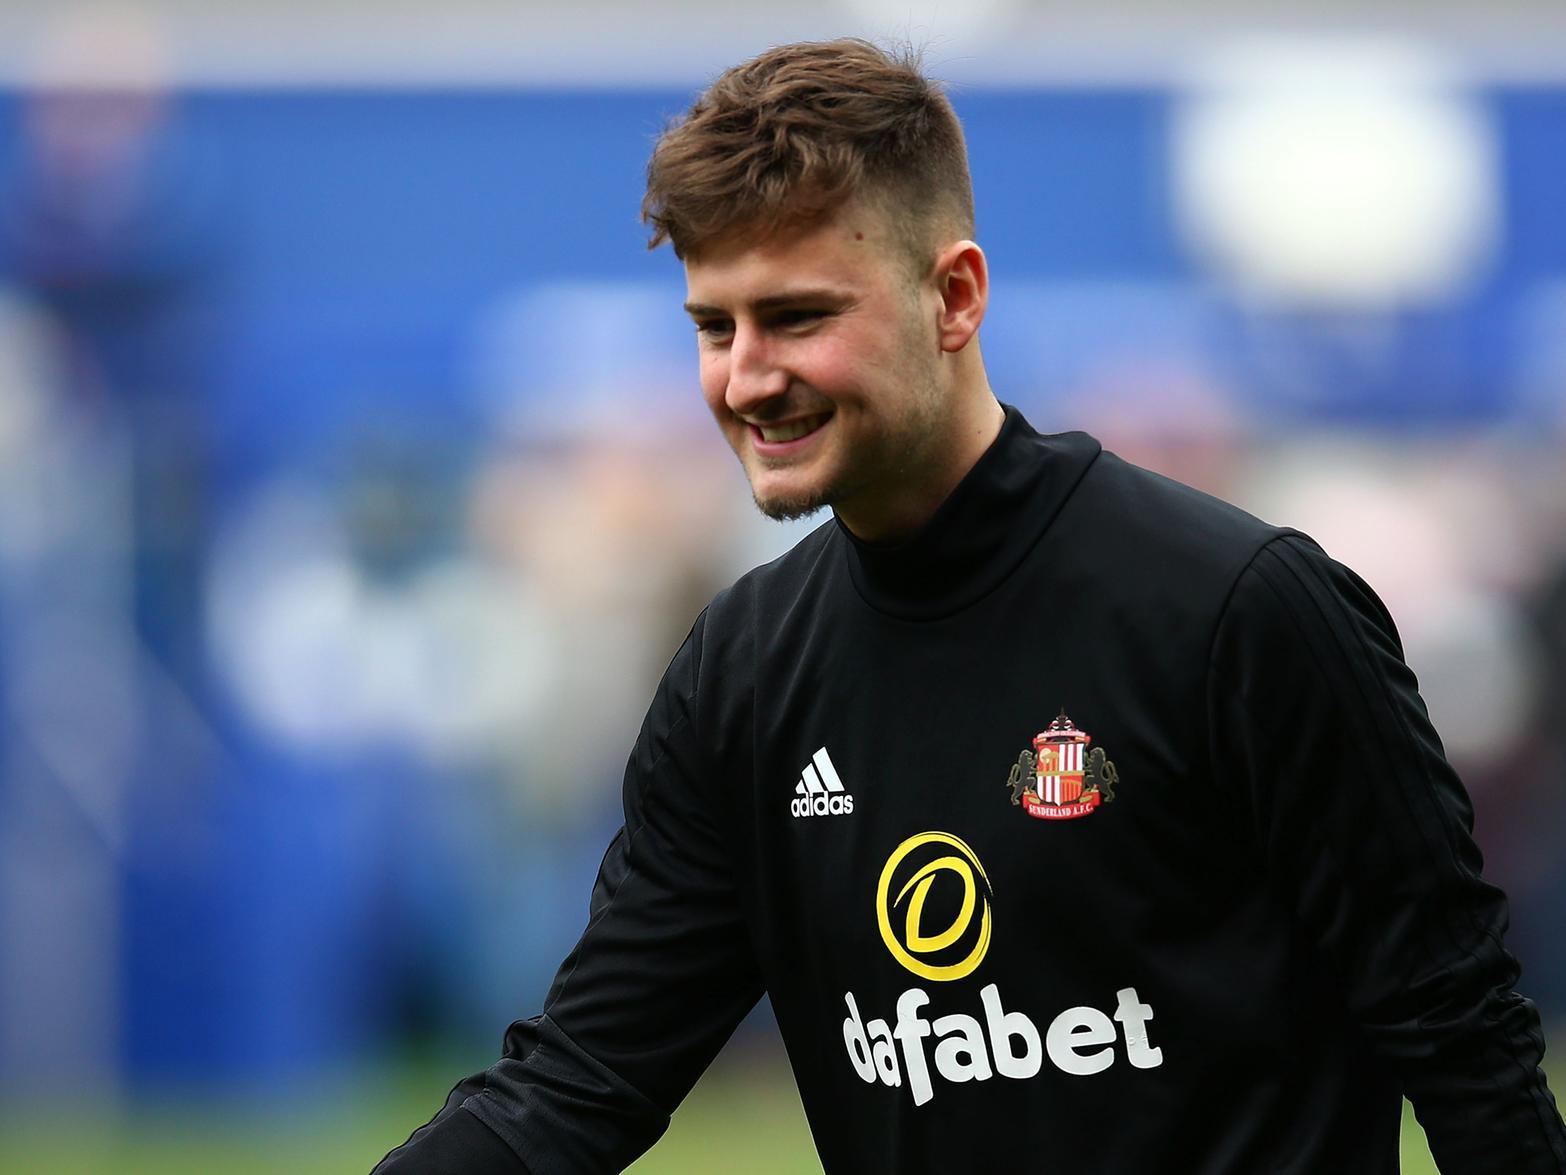 A decision on Sunderland player Ethan Robson, whose contract expires at the end of the season, is expected in the near future. (Sunderland Echo)